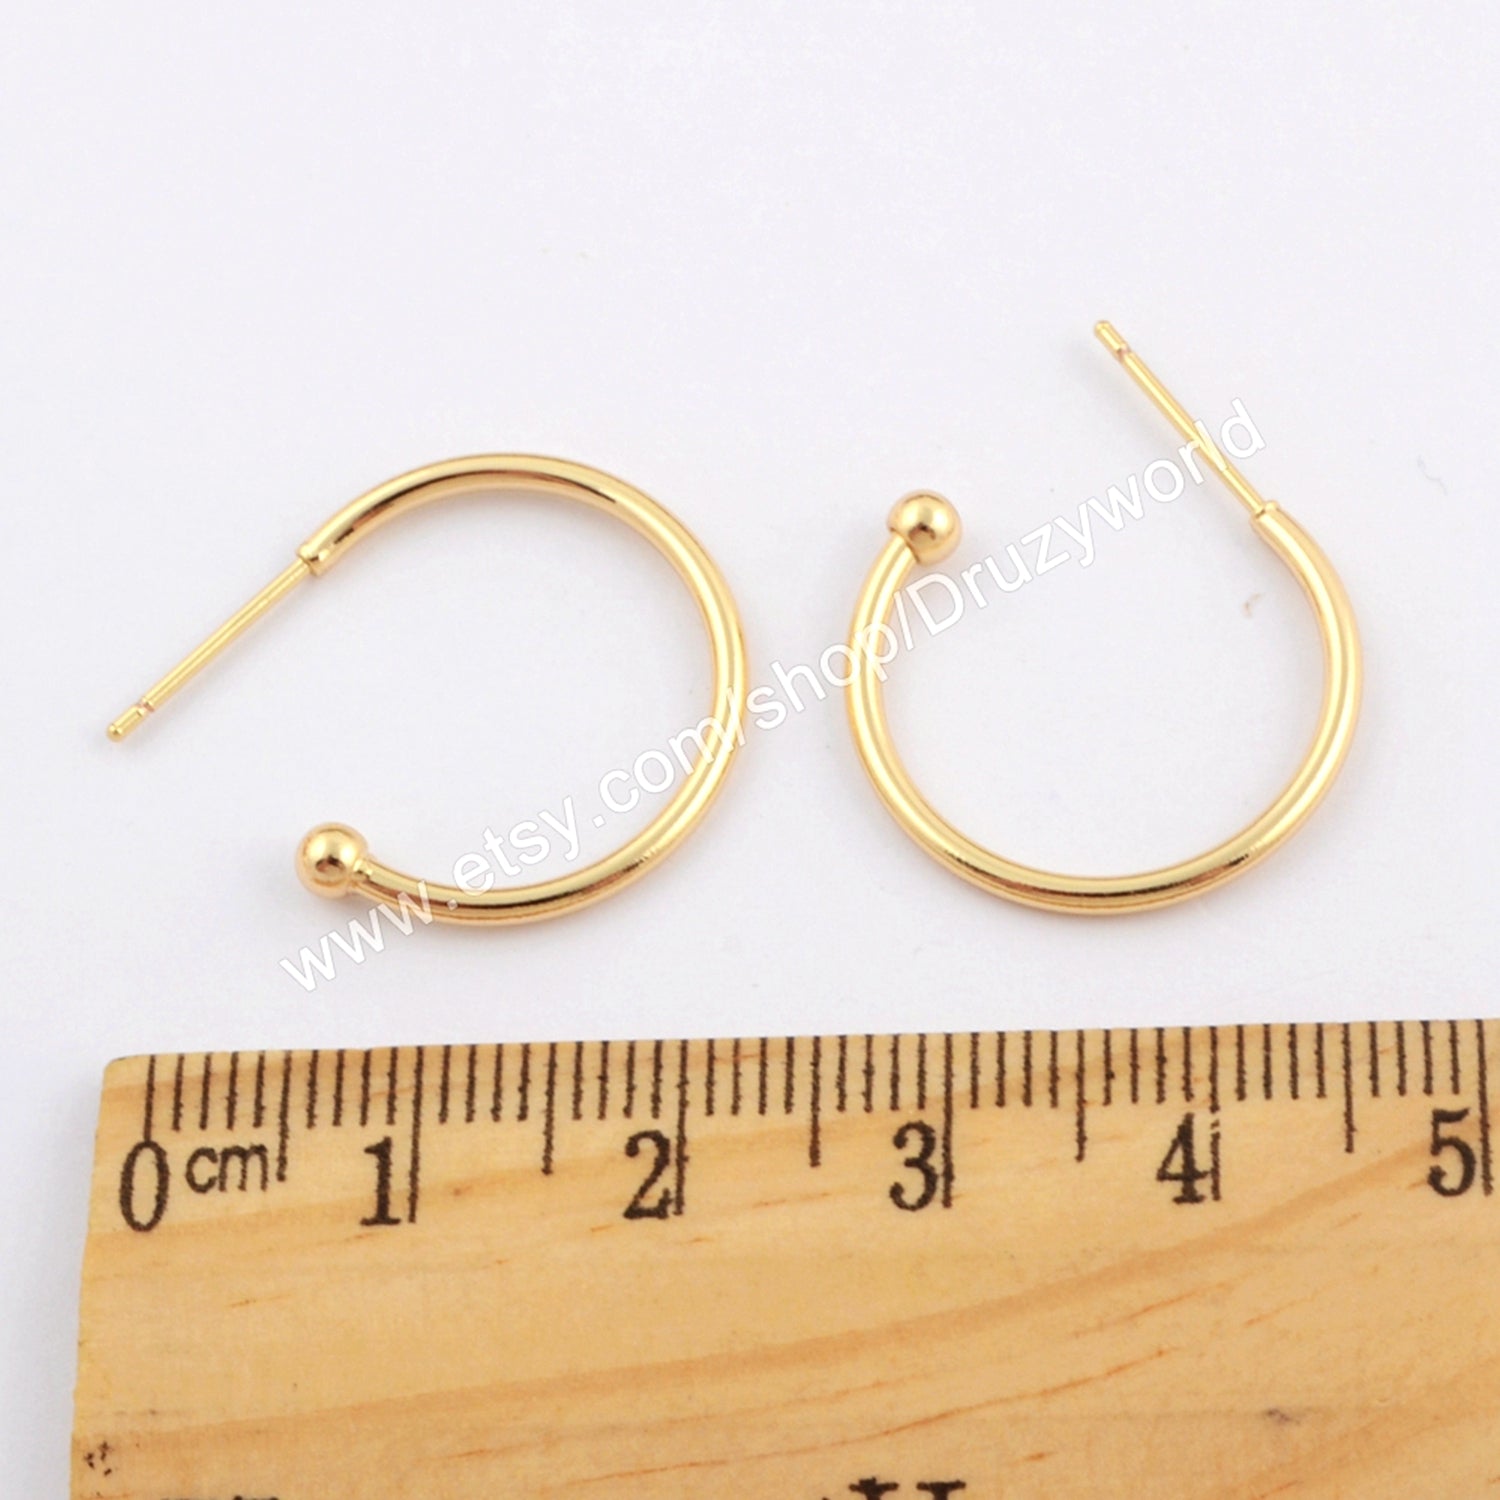 50 Pcs Fashion Gold Plated Brass Round Earring Findings 20mm Simple Circle Ear Wires Hooks Posts Tools DIY Making Jewelry Supply PJ388